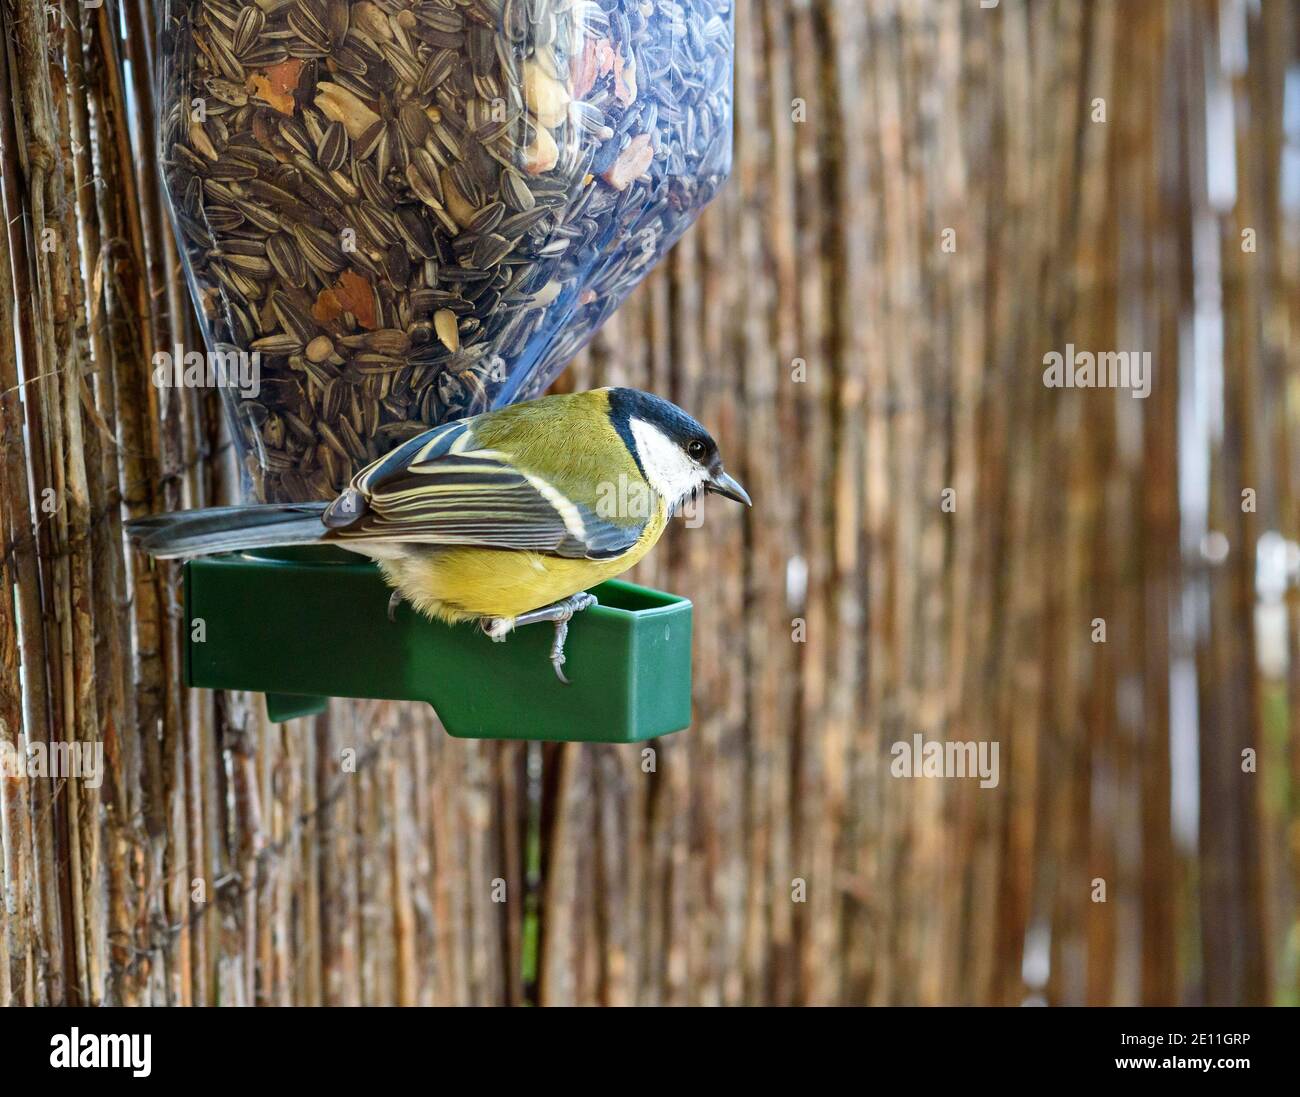 Titmouse sitting on the edge of a feeder, looking away, close-up Stock Photo